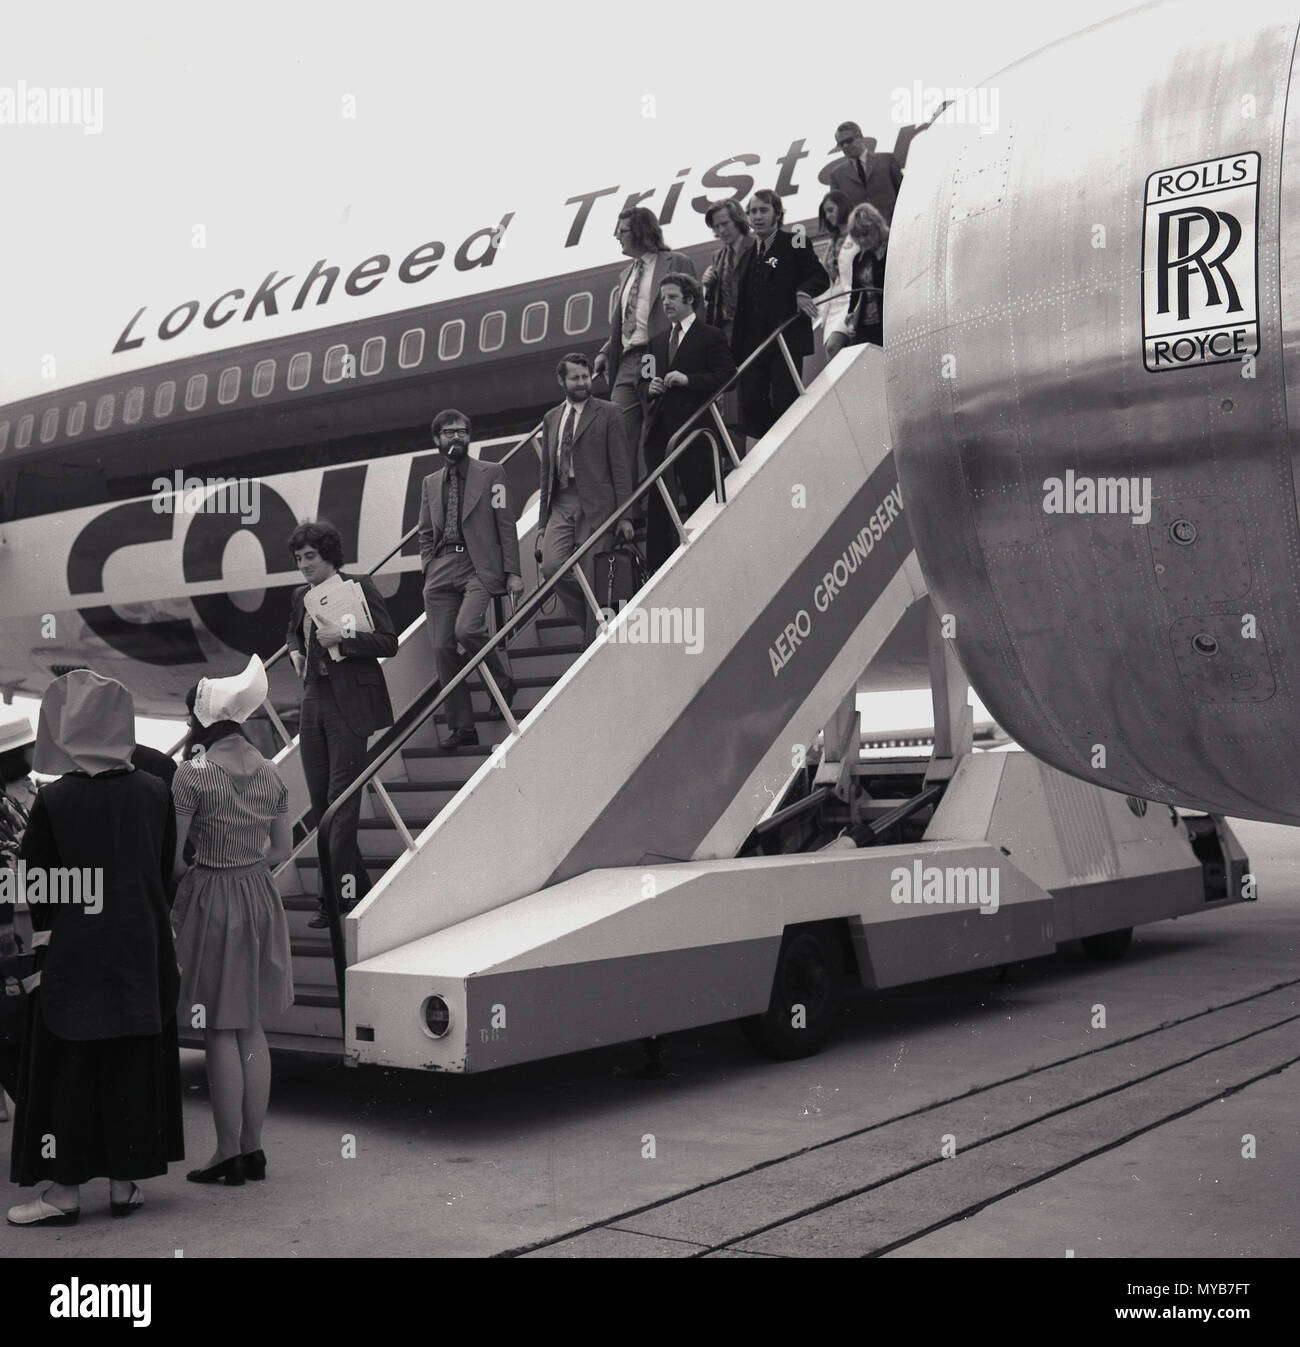 1973, historical, passengers disembarking from a Lockheed Tristar airplance (L-1011), the most technologically-advanced widebody commercial aircraft in the world. Court Line Aviation, a British holiday charter company, were the first European airline to operate the Lockheed widebody. The TriStar was powered by the Rolls-Royce RB211 engine, a three-spool engine capable of generating incredible thrust. Stock Photo